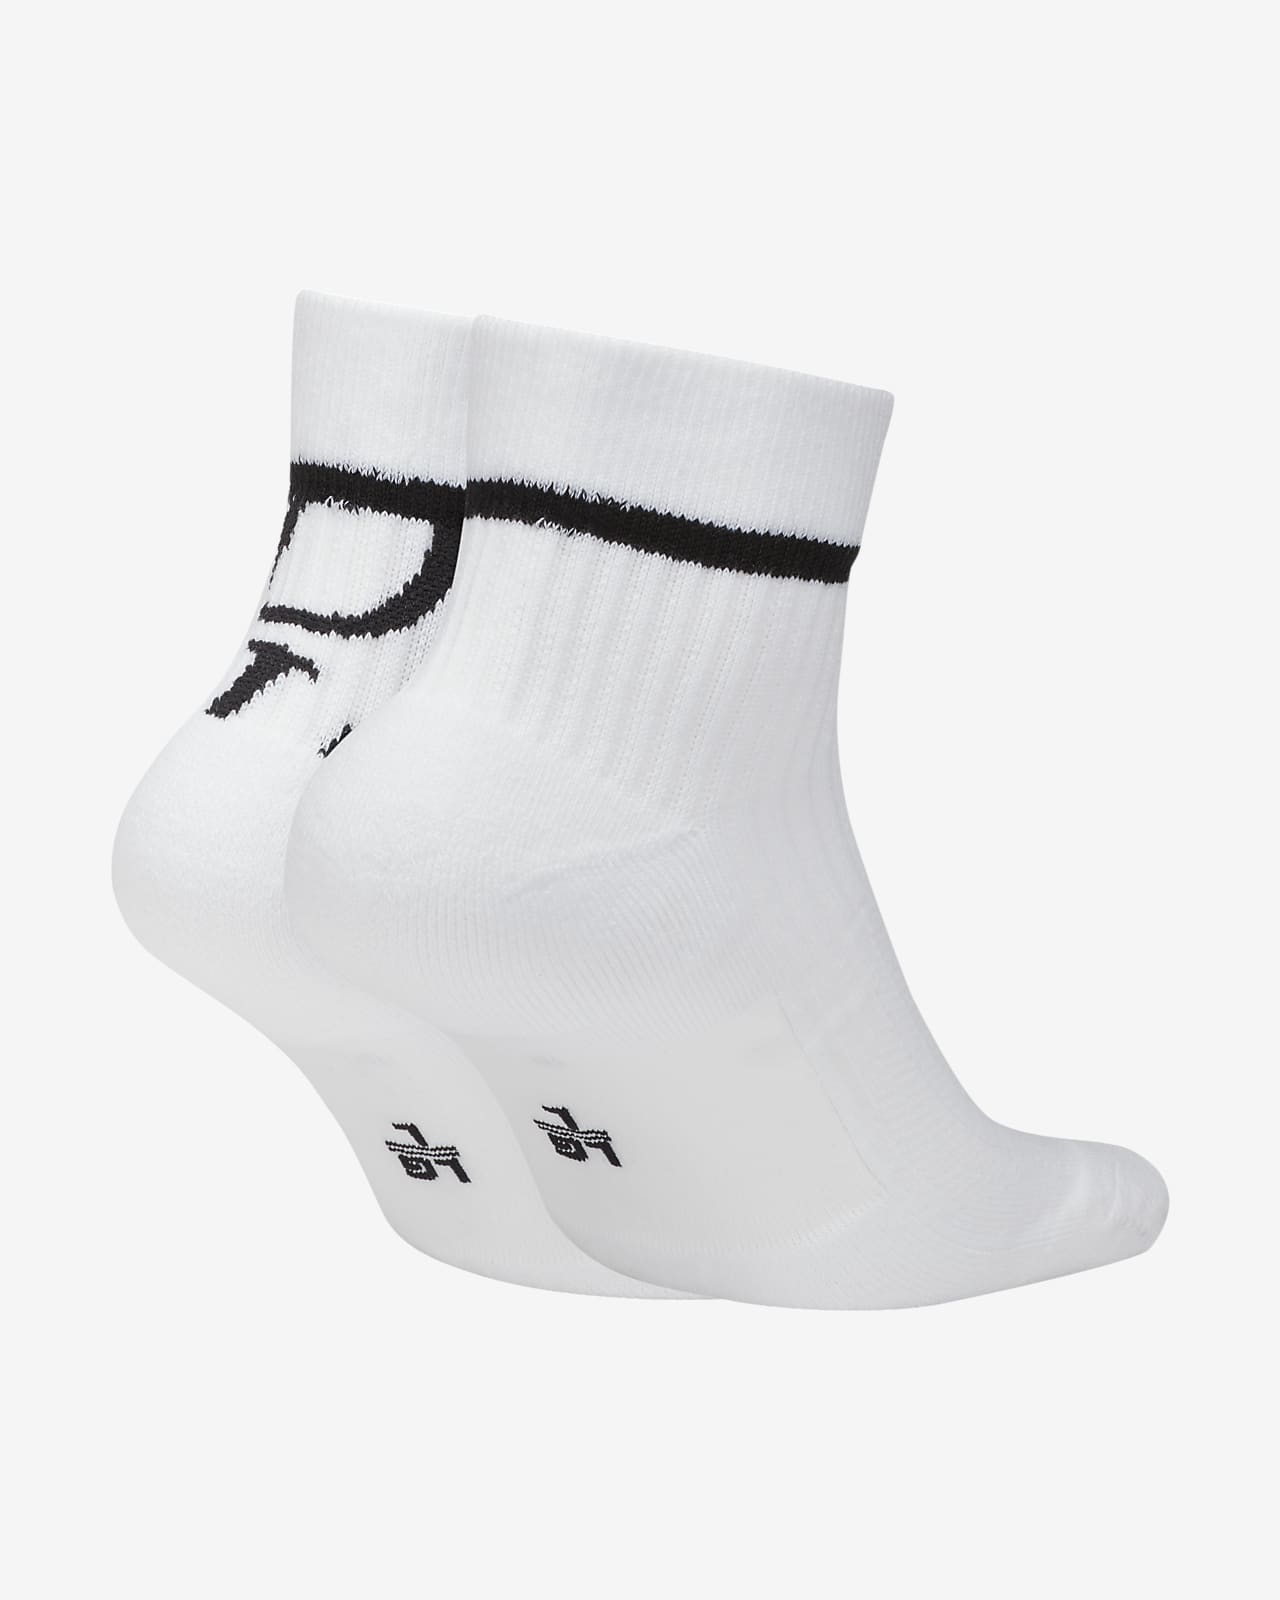 nike snkr sox ankle